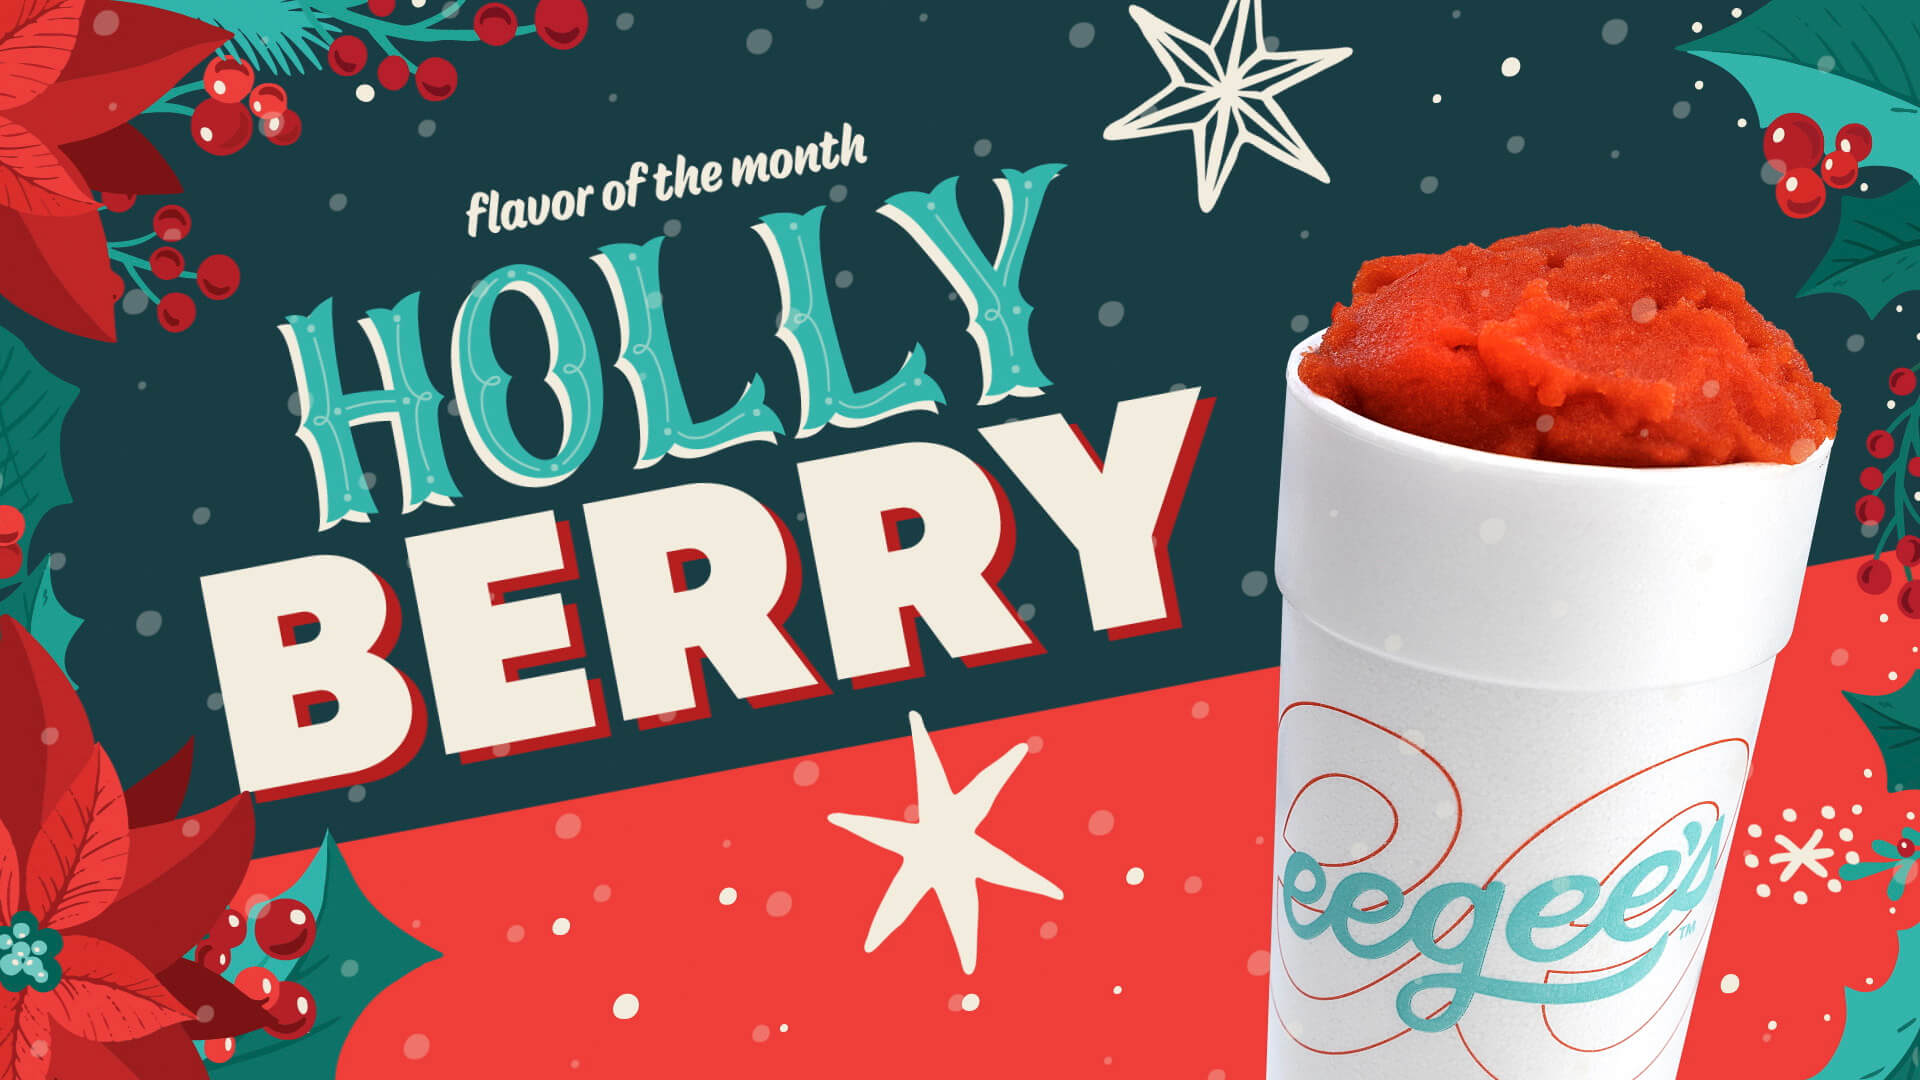 Holly Berry eegee poster